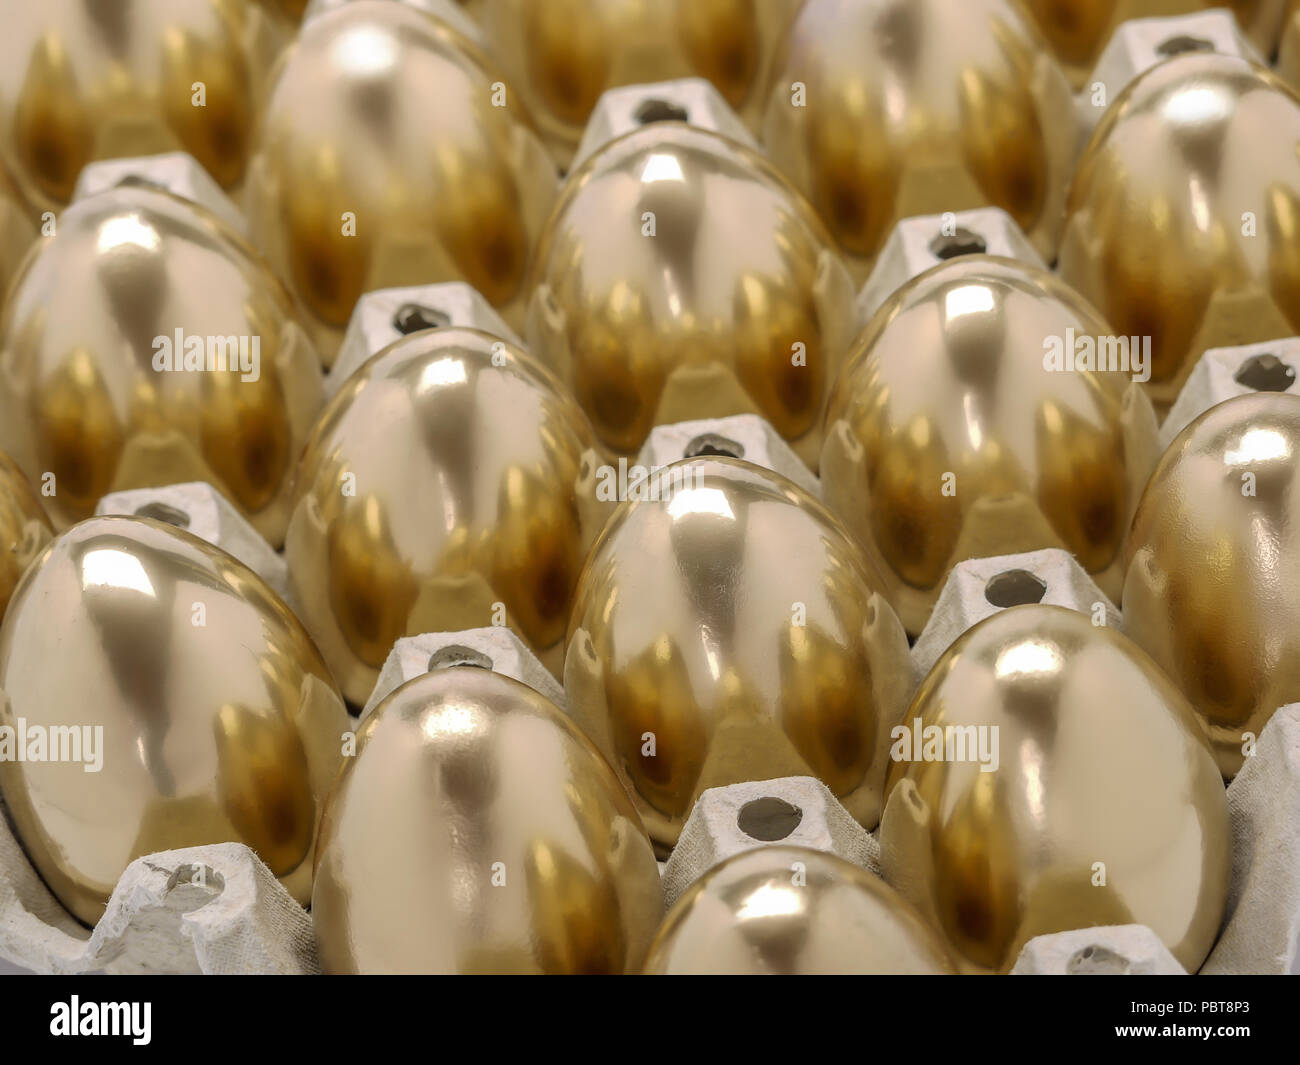 Bunch of golden eggs in egg tray shot from above Stock Photo